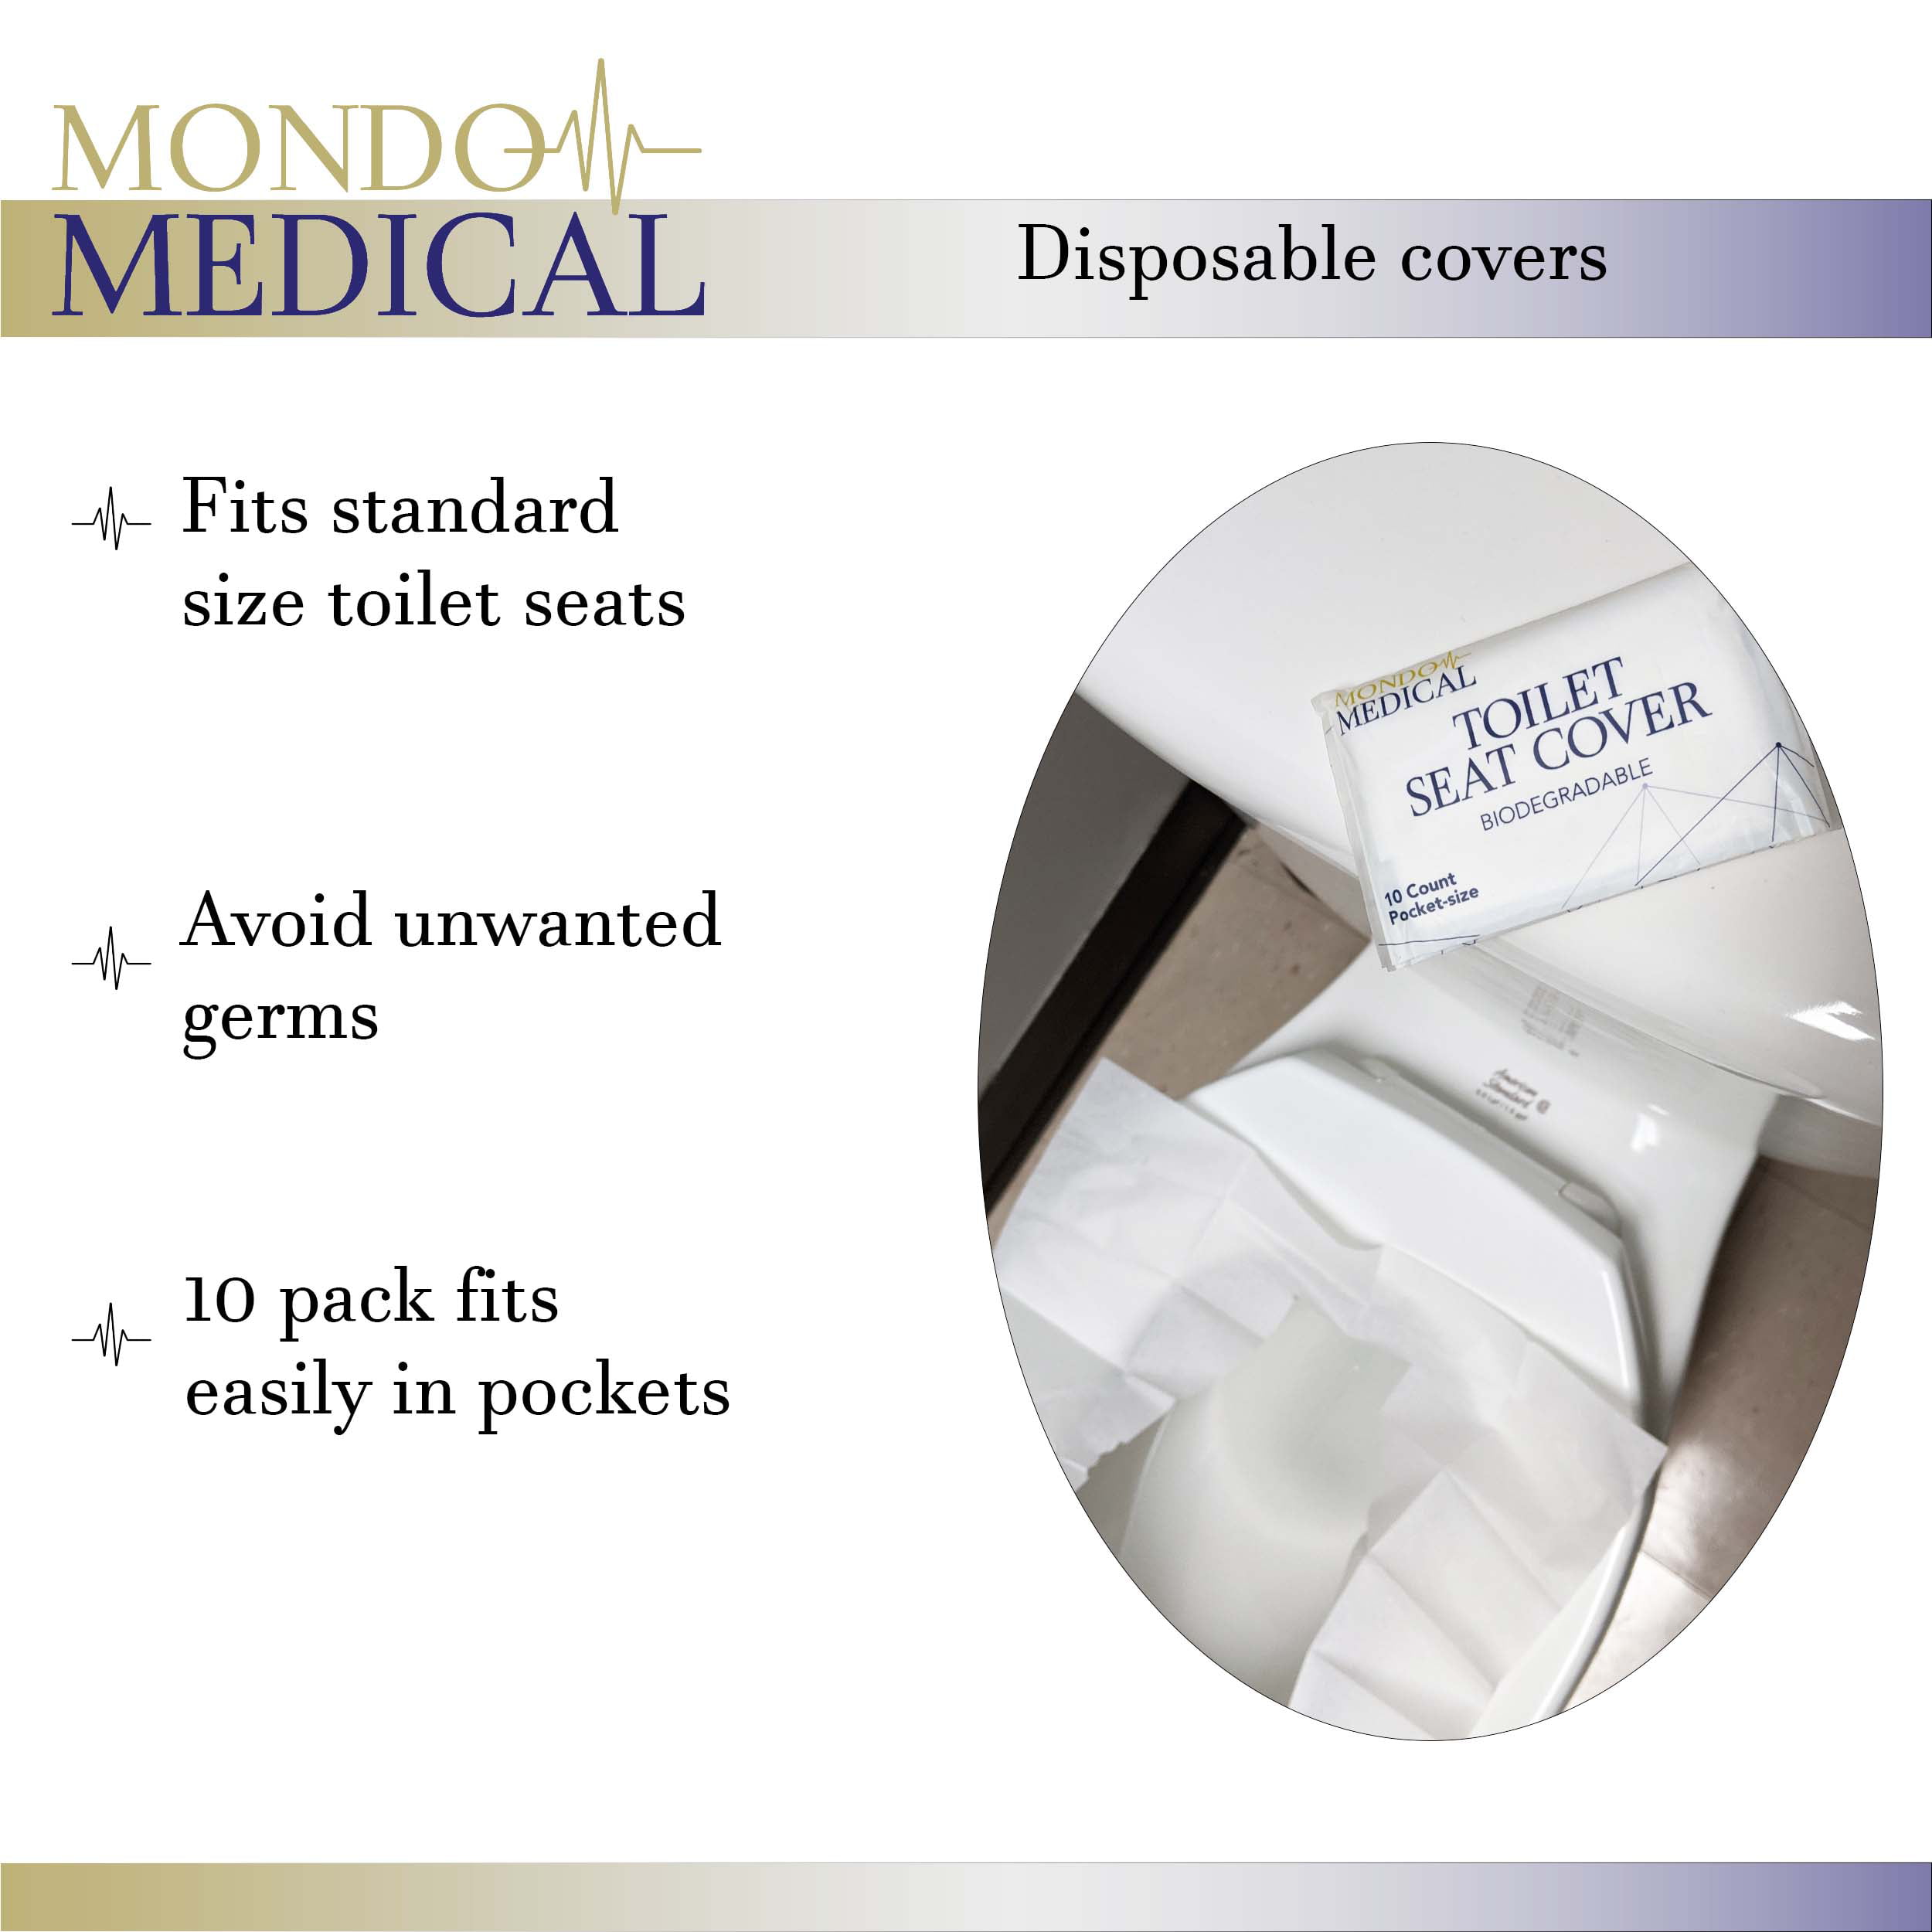 MonMed Toilet Seat Covers Disposable Seat Covers 1/28 Fold 14.2x16.7 Inch 100pc 